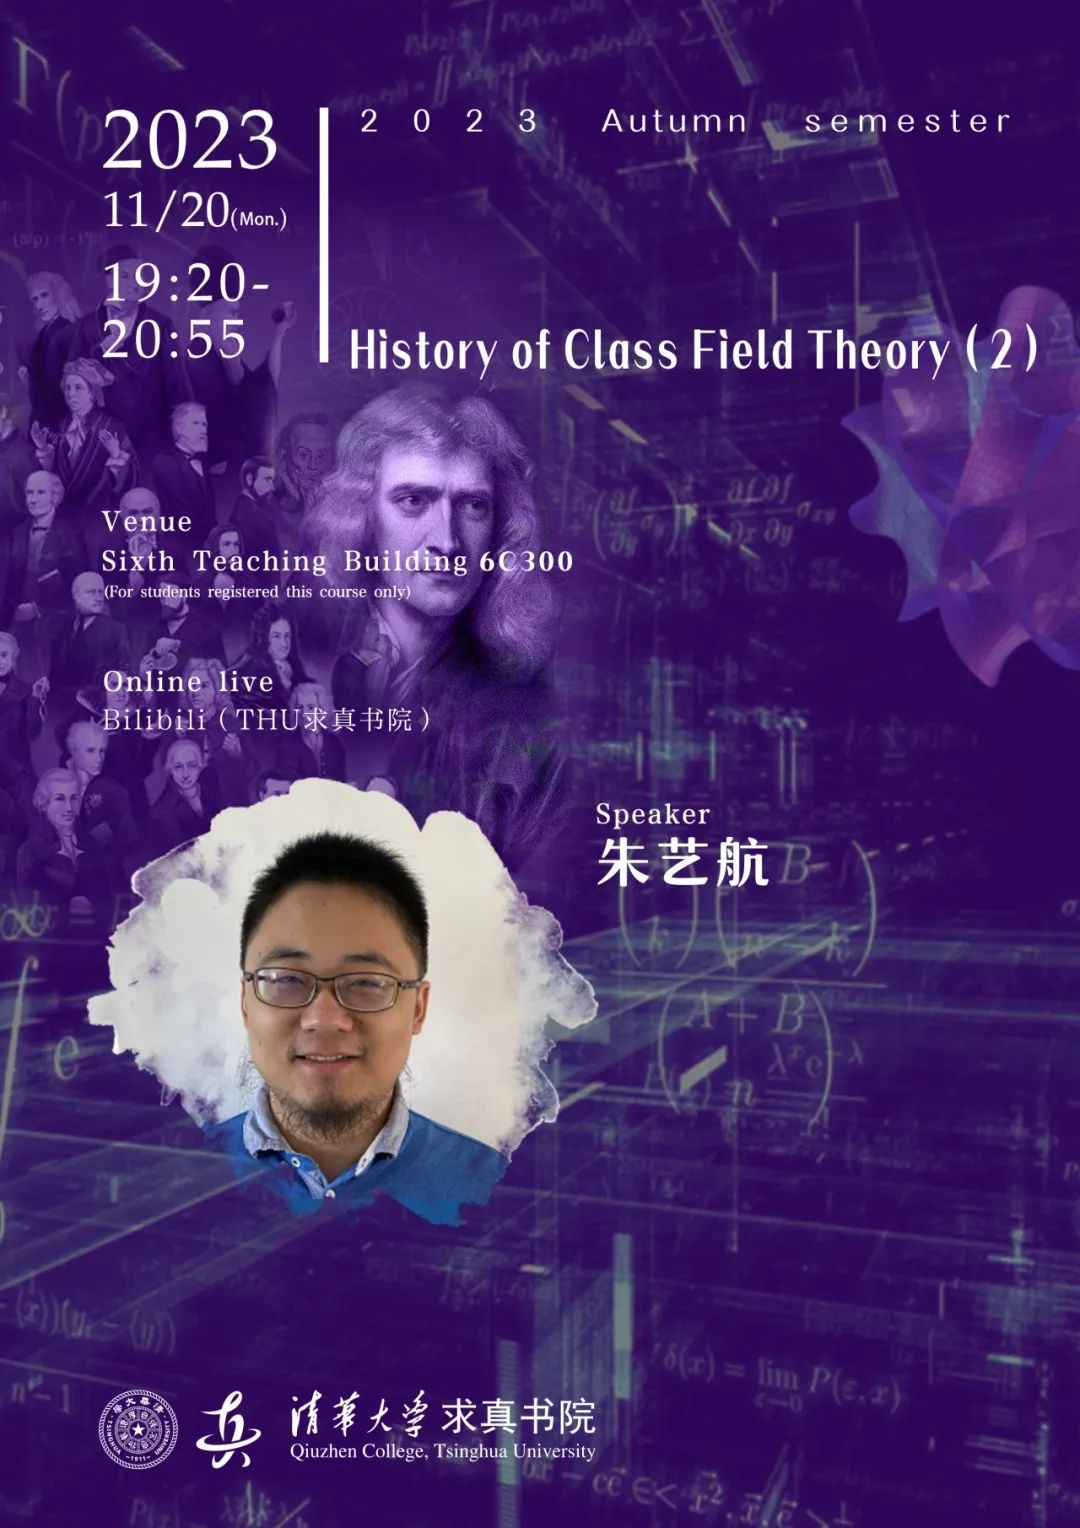 History of Class Field Theory (2)